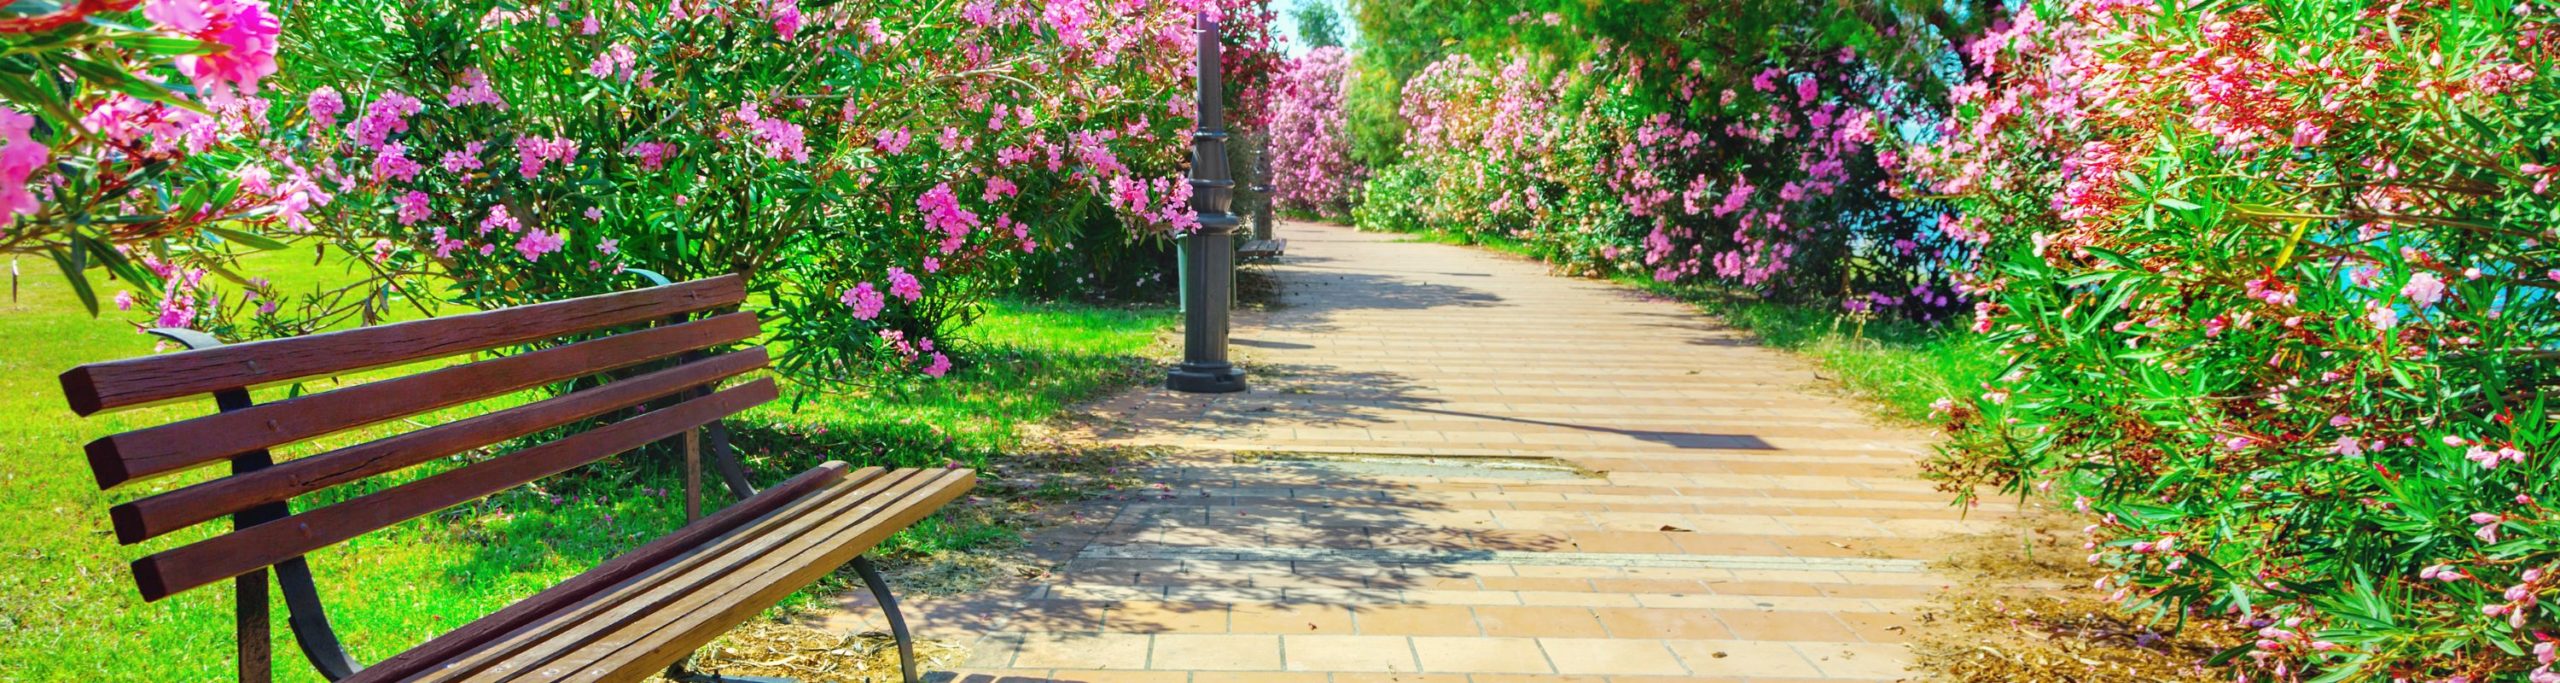 Parks--image of walkway with flowering bushes through a park